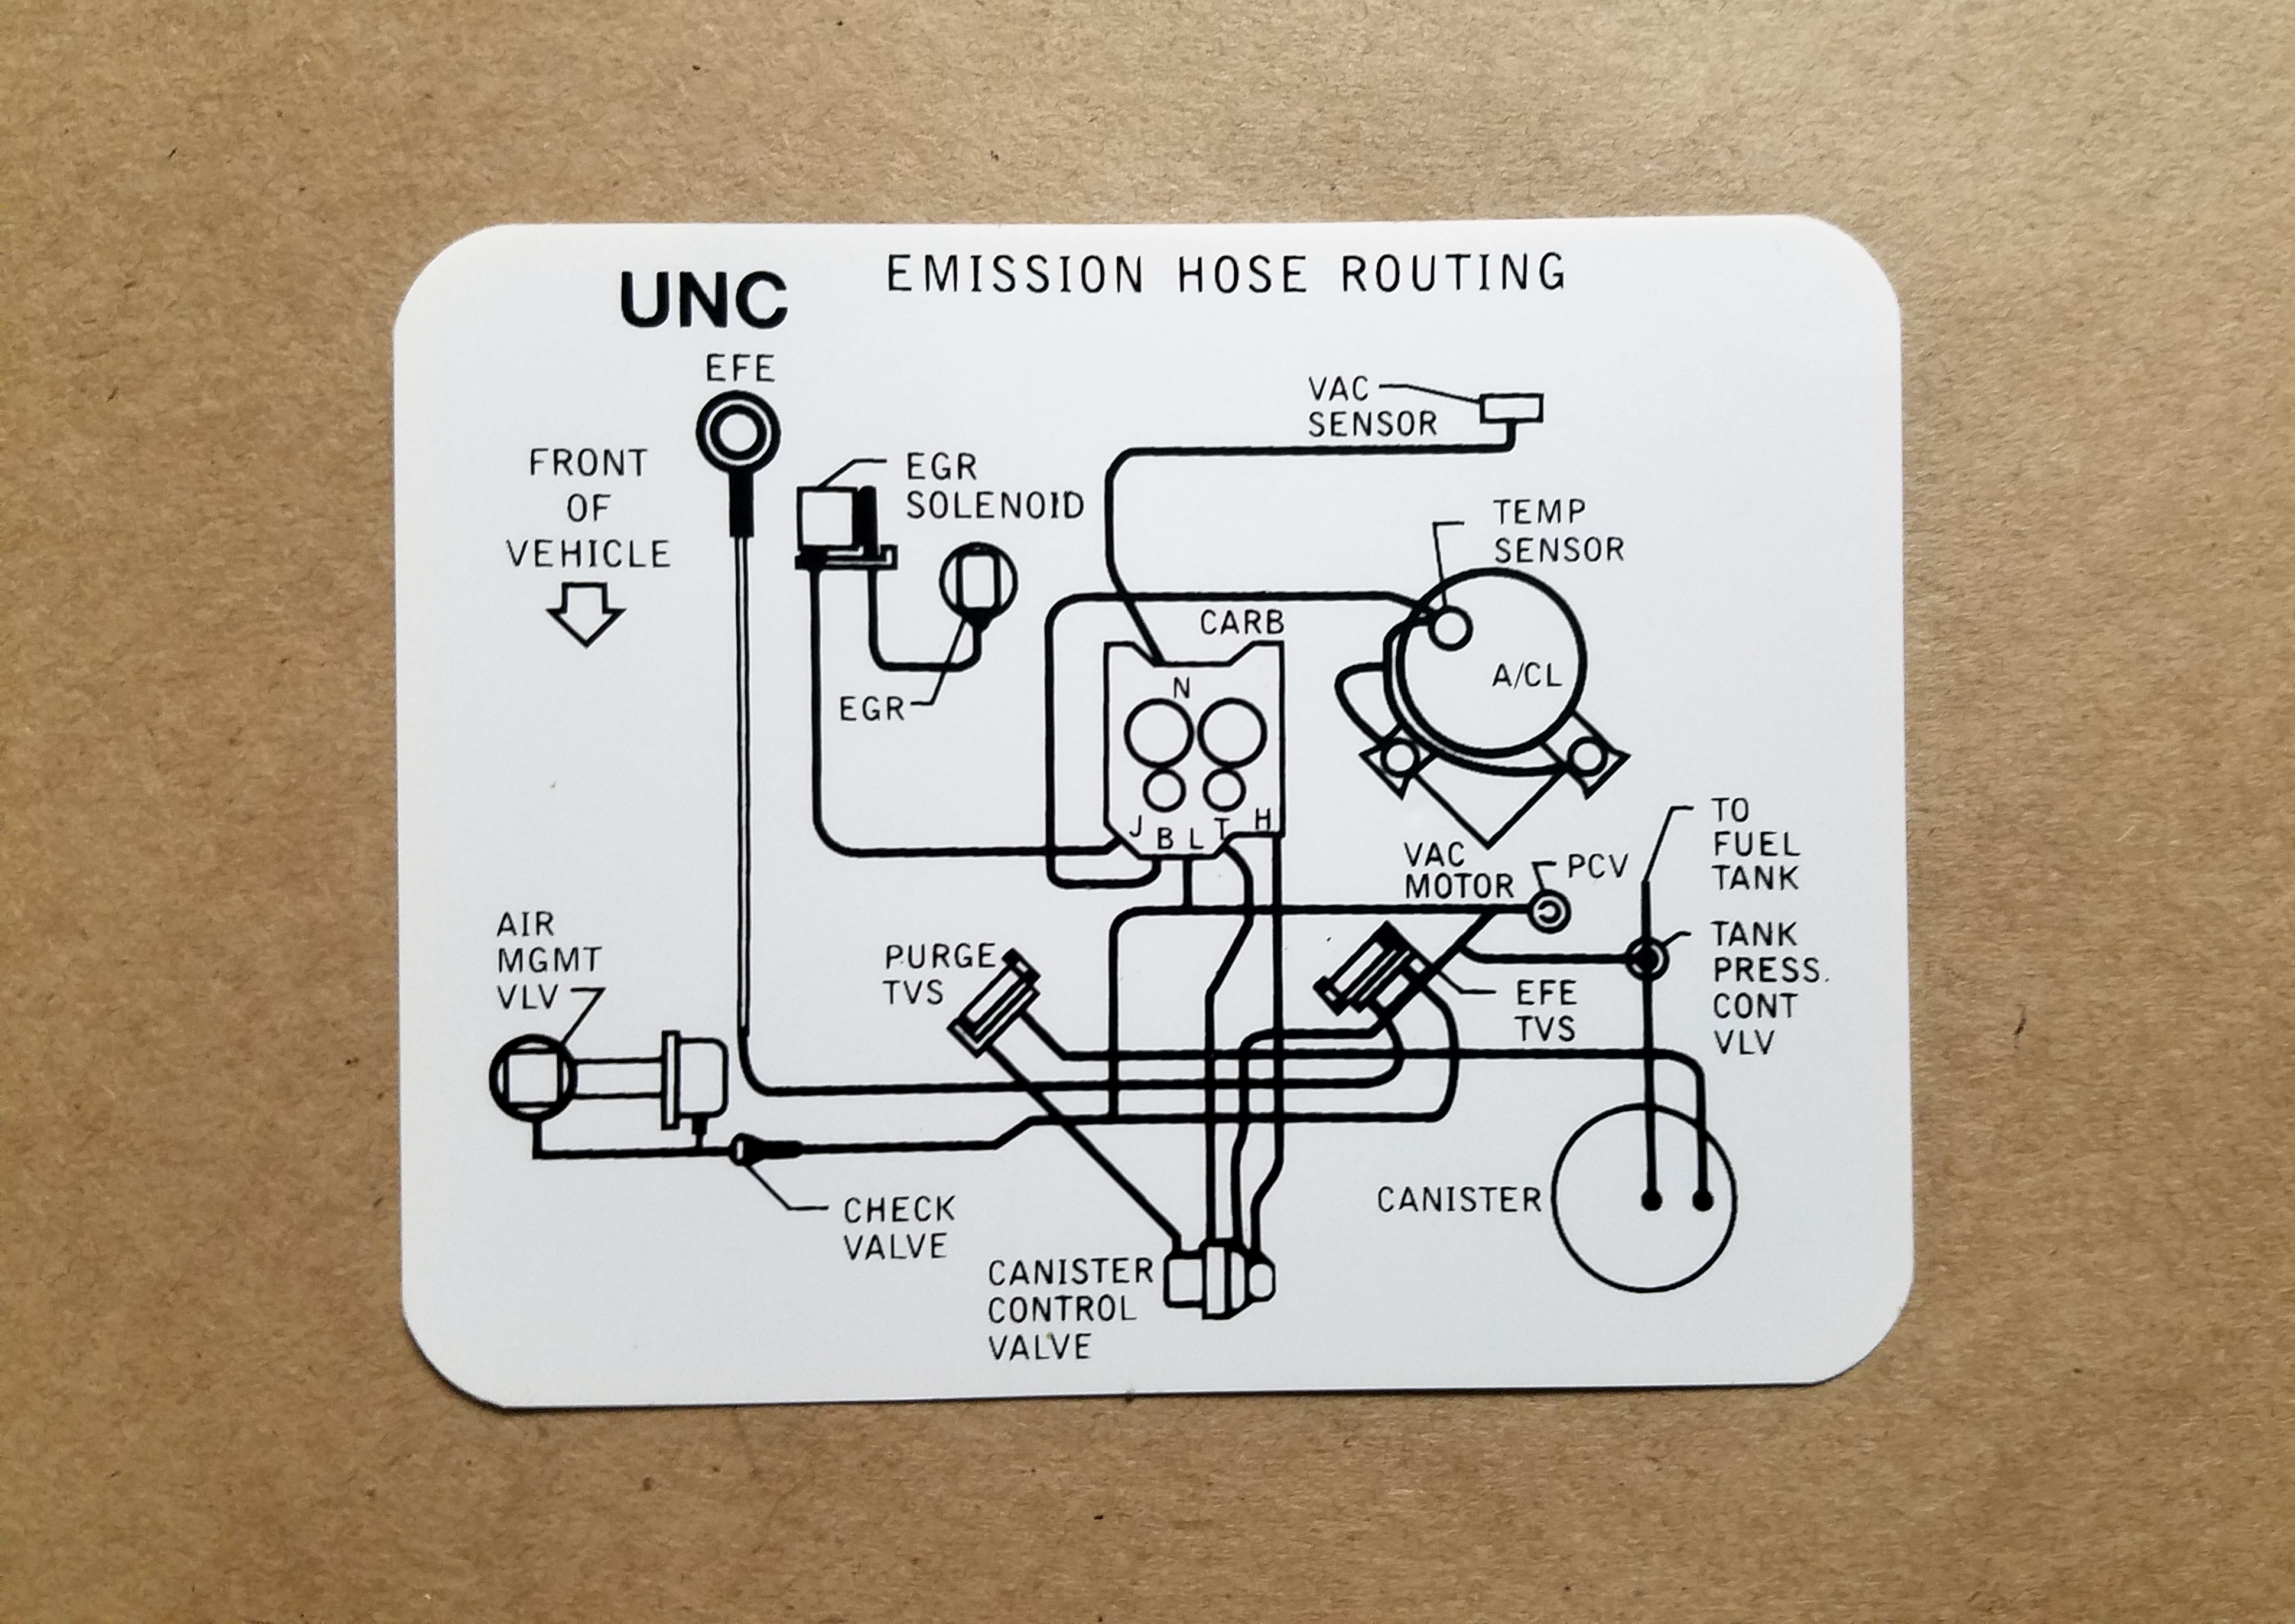 1985 Emissions Routing Decal, 305G MT (On Decal: UNC) ..